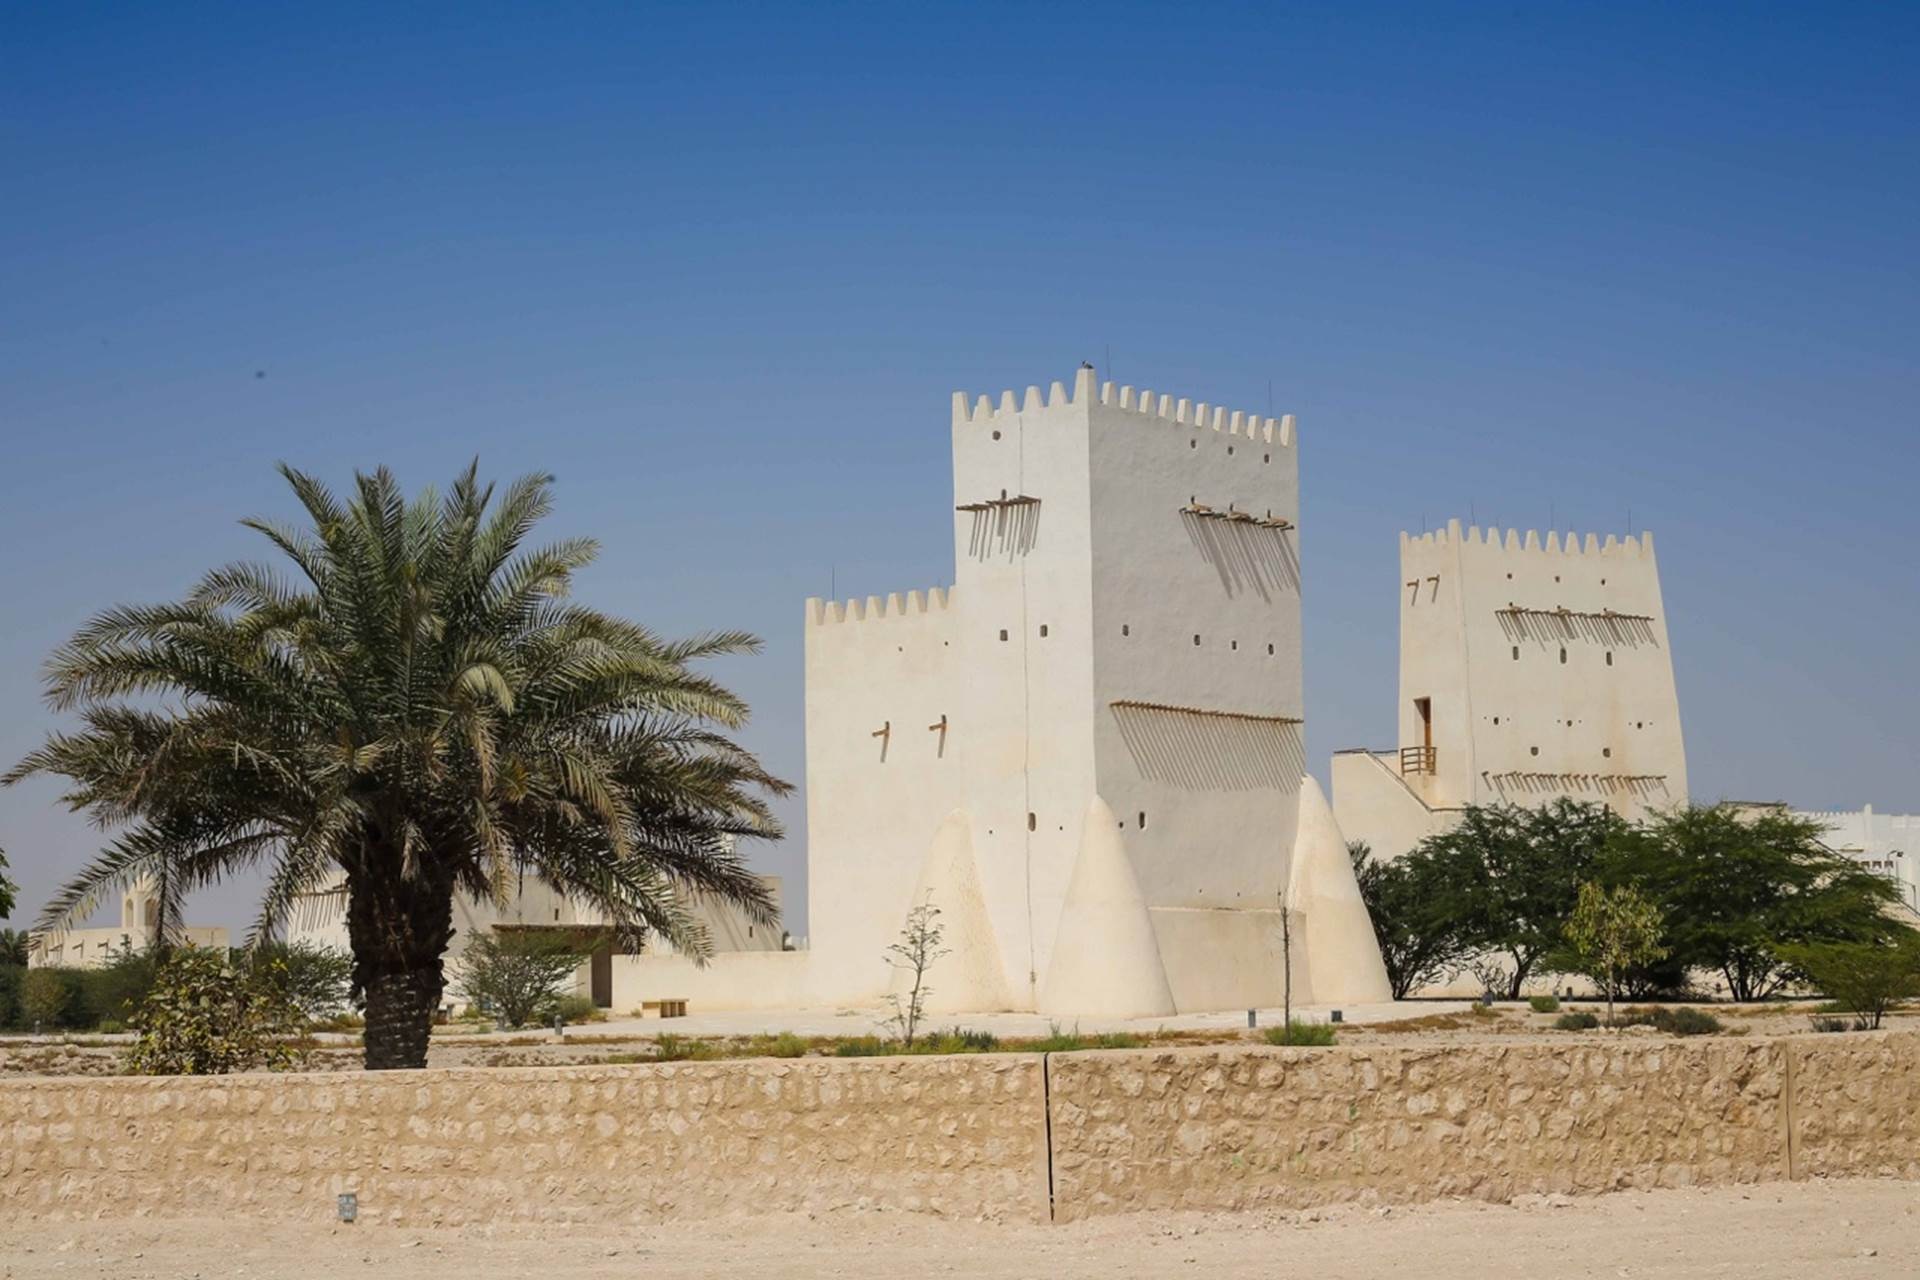 Barzan Towers, are watchtowers that were built in the late 19th century and renovated in 1910